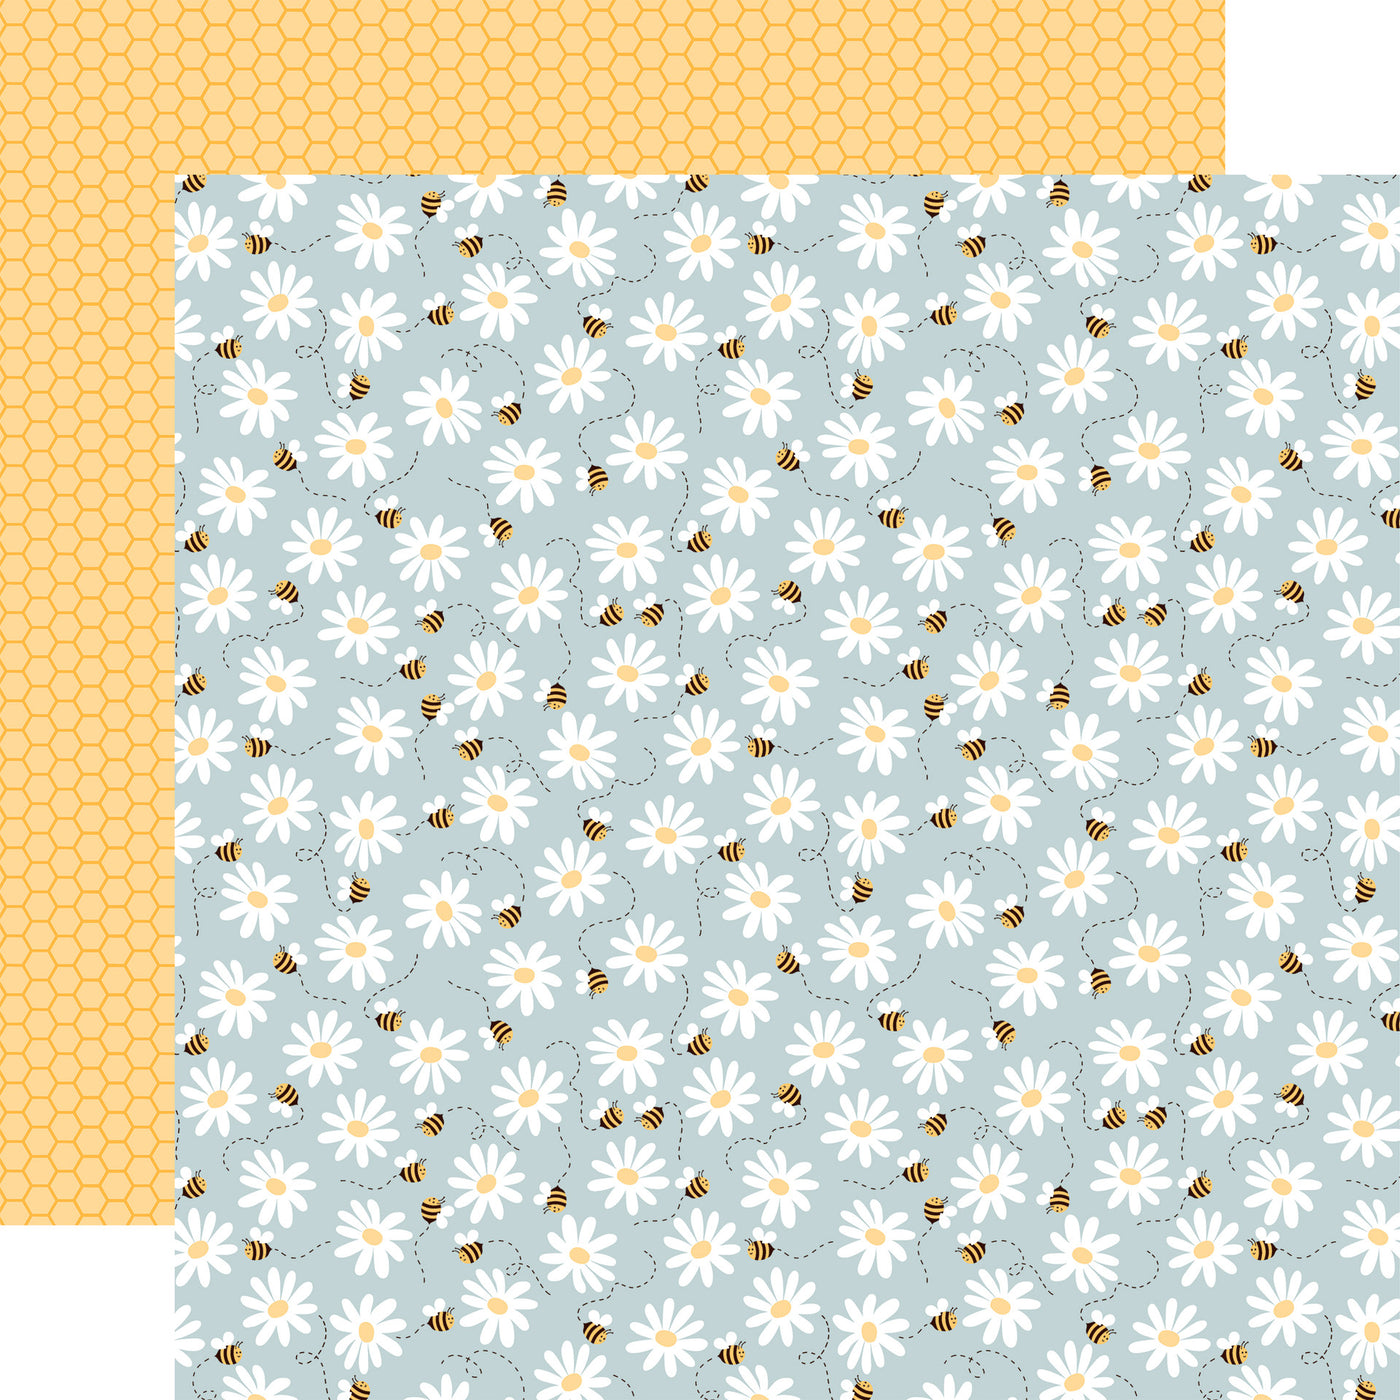 (Side A - cute little bees buzzing around white and yellow flowers on a light blue background, Side B - yellow honeycomb pattern), archival quality, acid-free. 